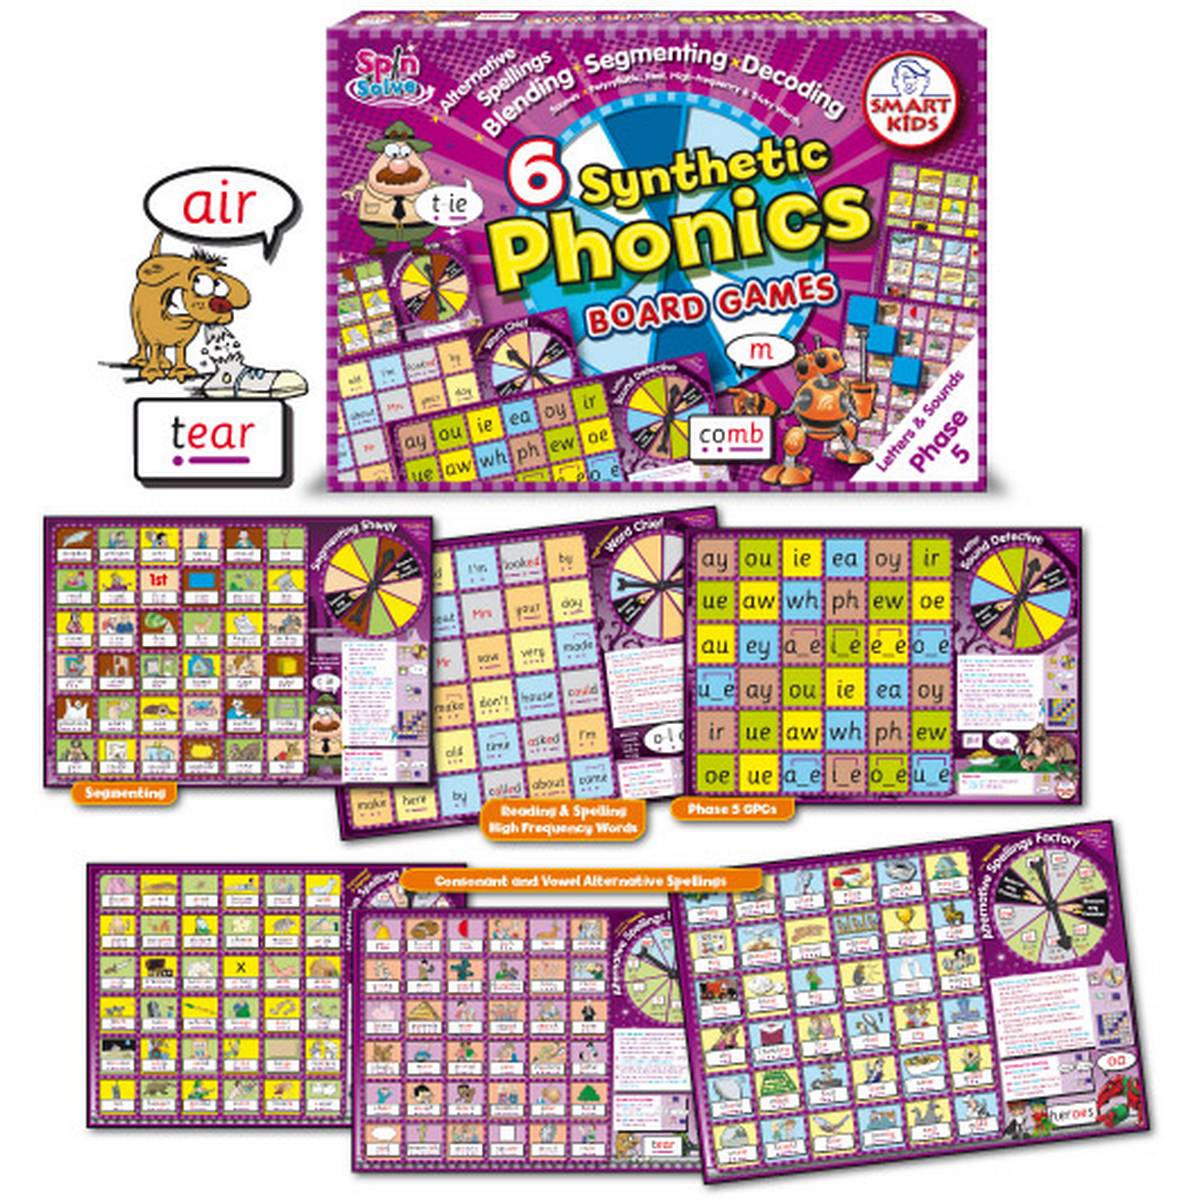 Synthetic Phonics Boards Games Age 6-8 Set of 6